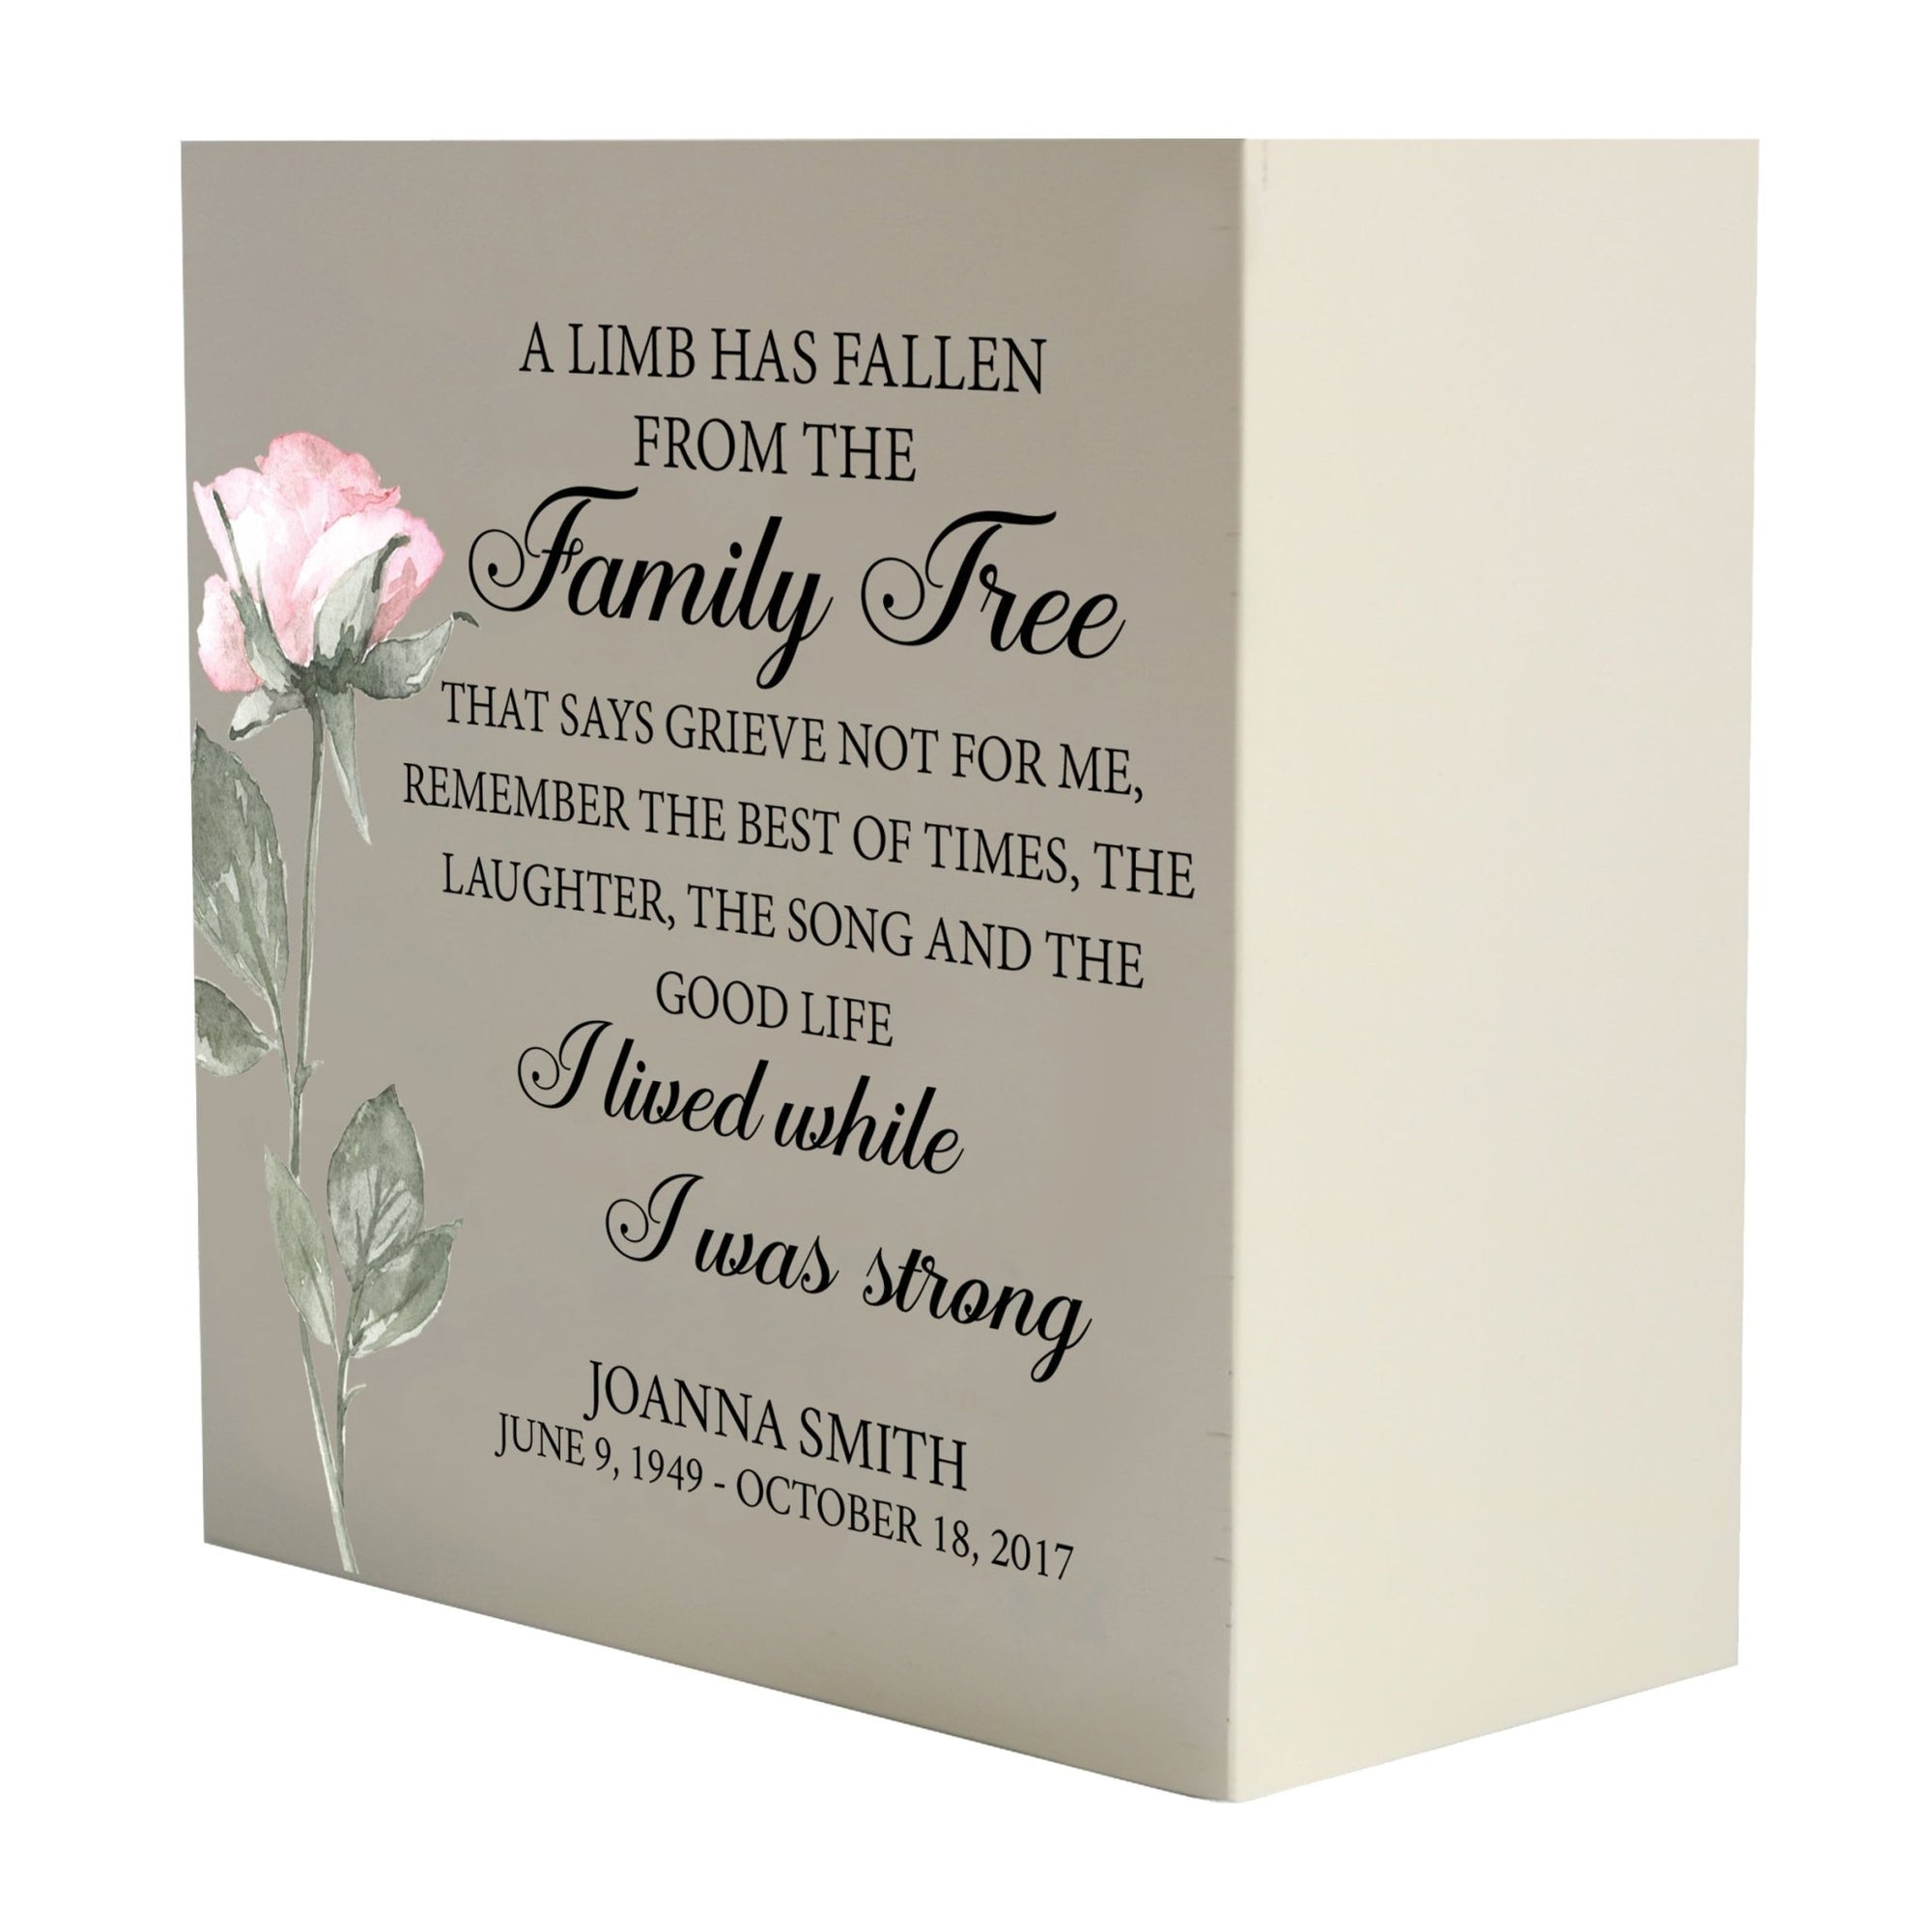 Personalized Modern Inspirational Memorial Wooden Shadow Box and Urn 6x6 holds 53 cu in of Human Ashes - A Limb Has Fallen (Song) - LifeSong Milestones